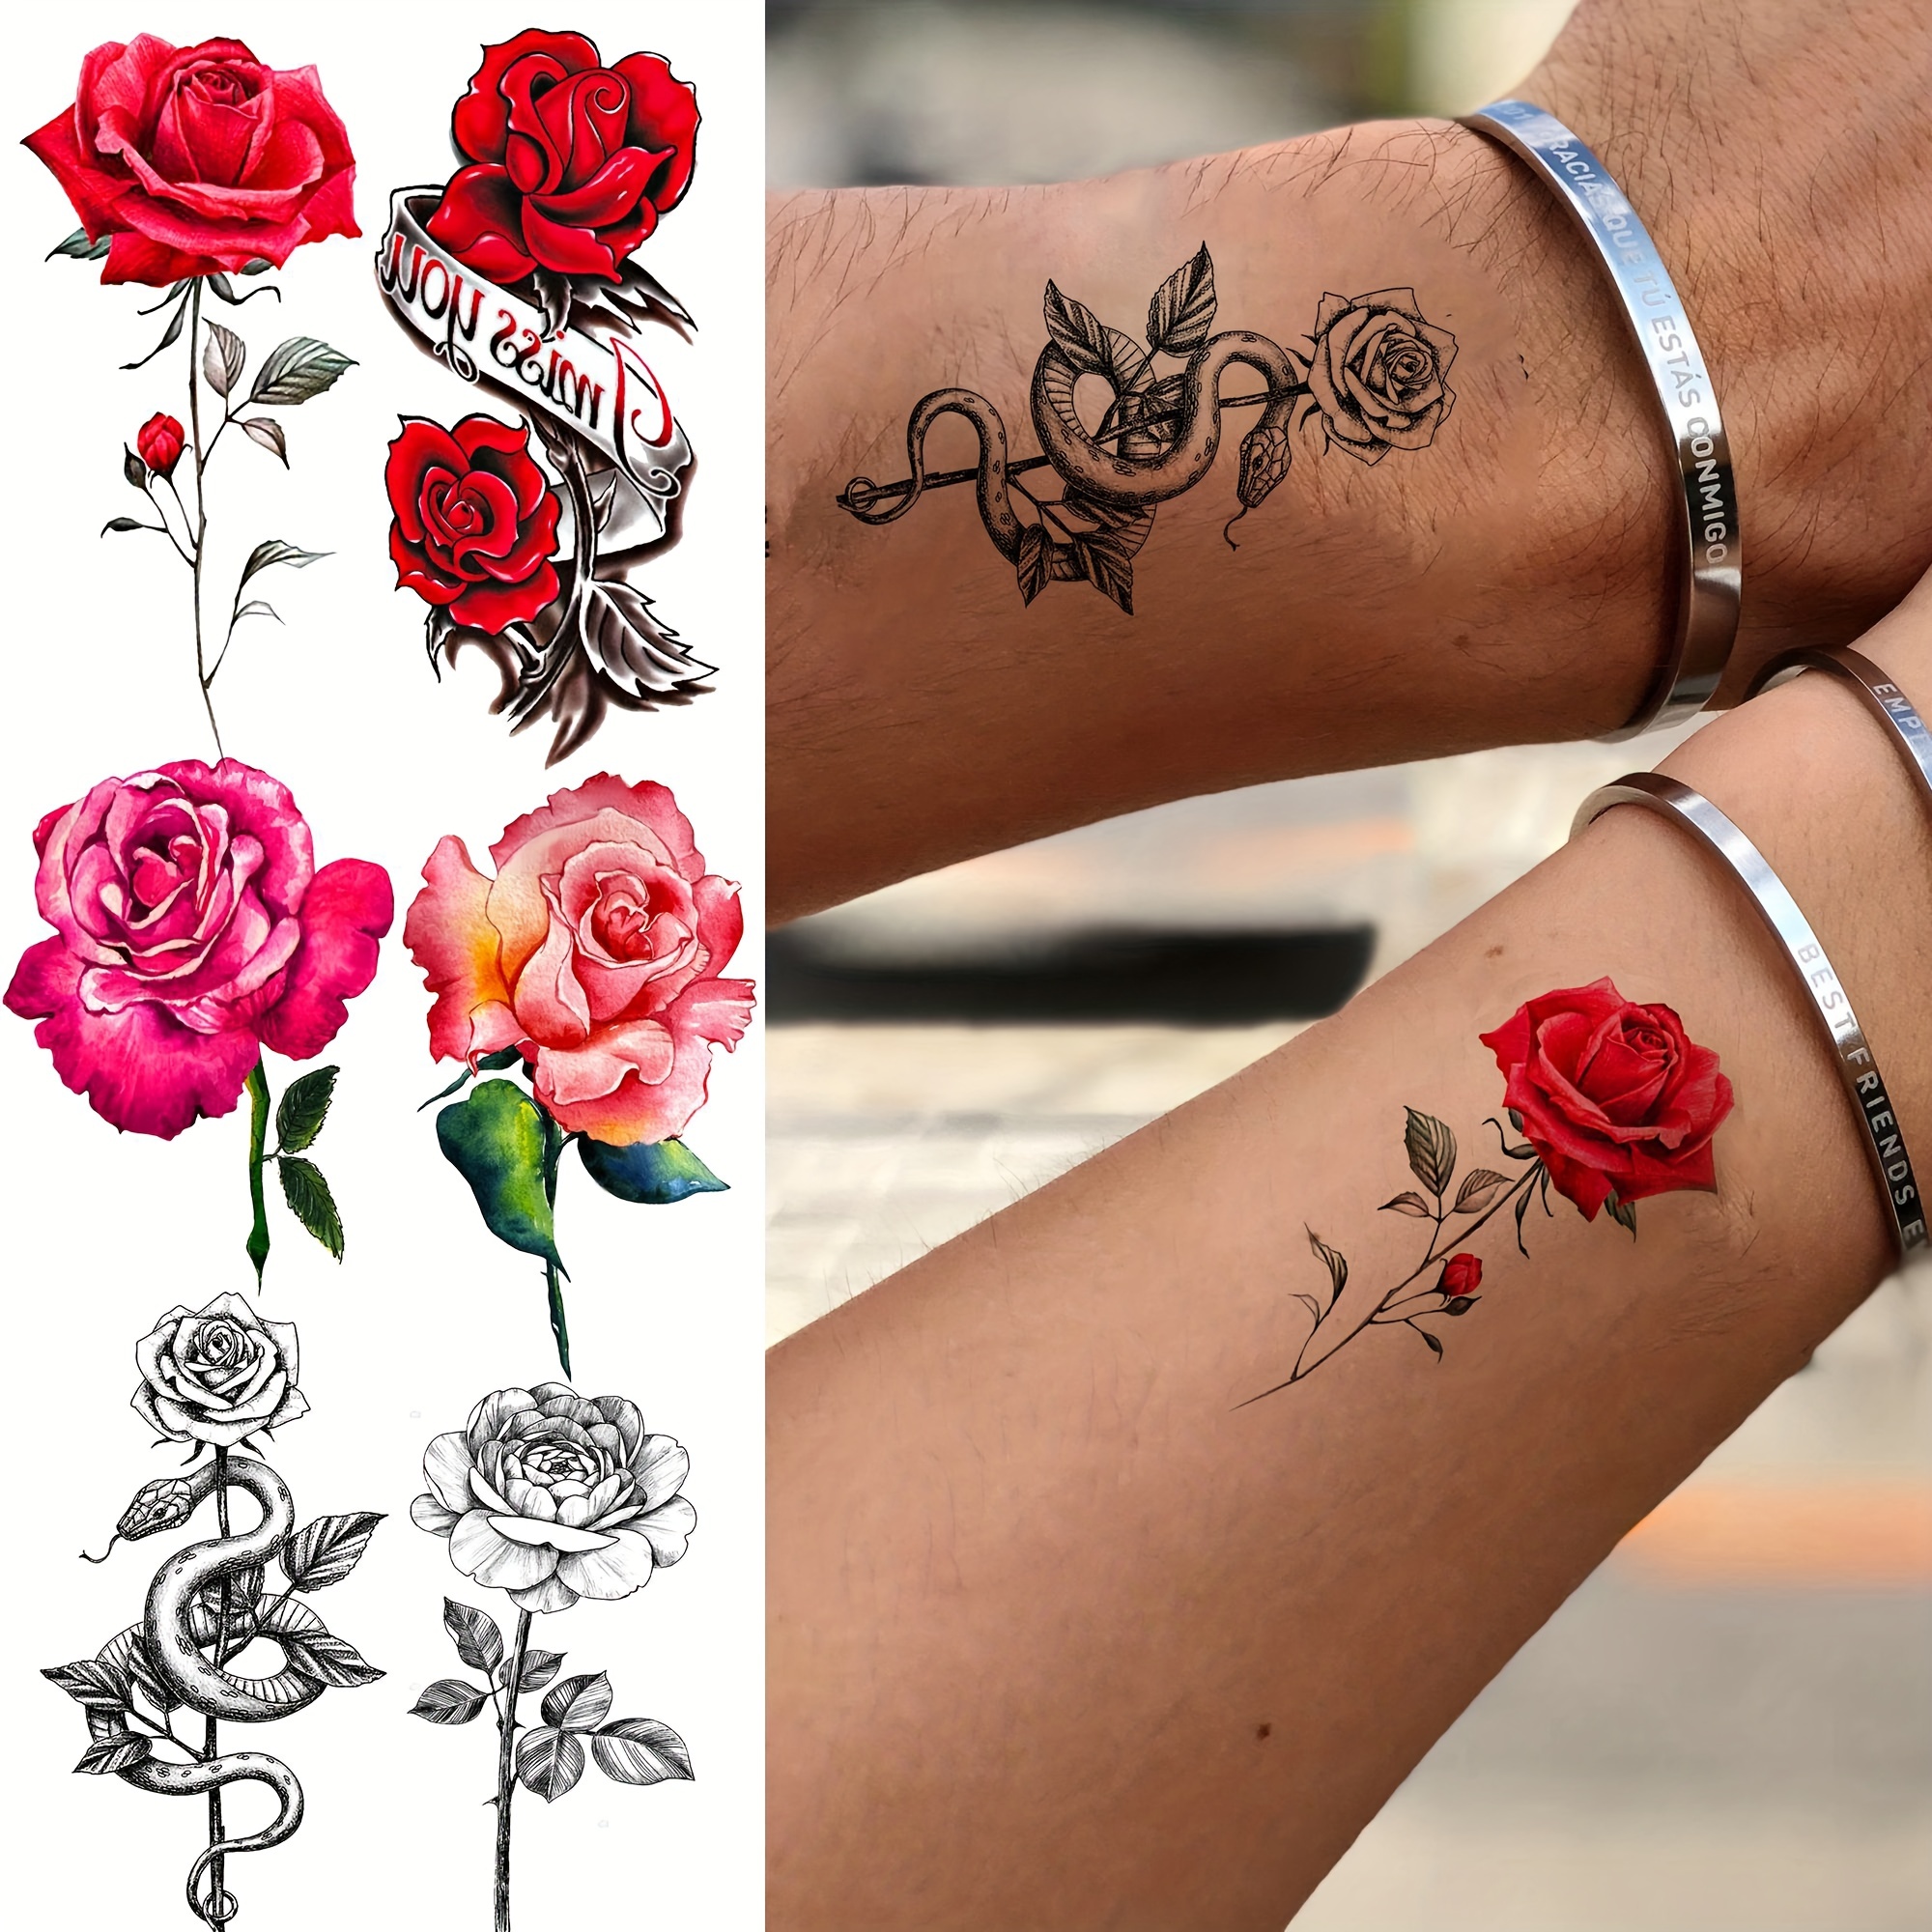 rose tattoos black and red